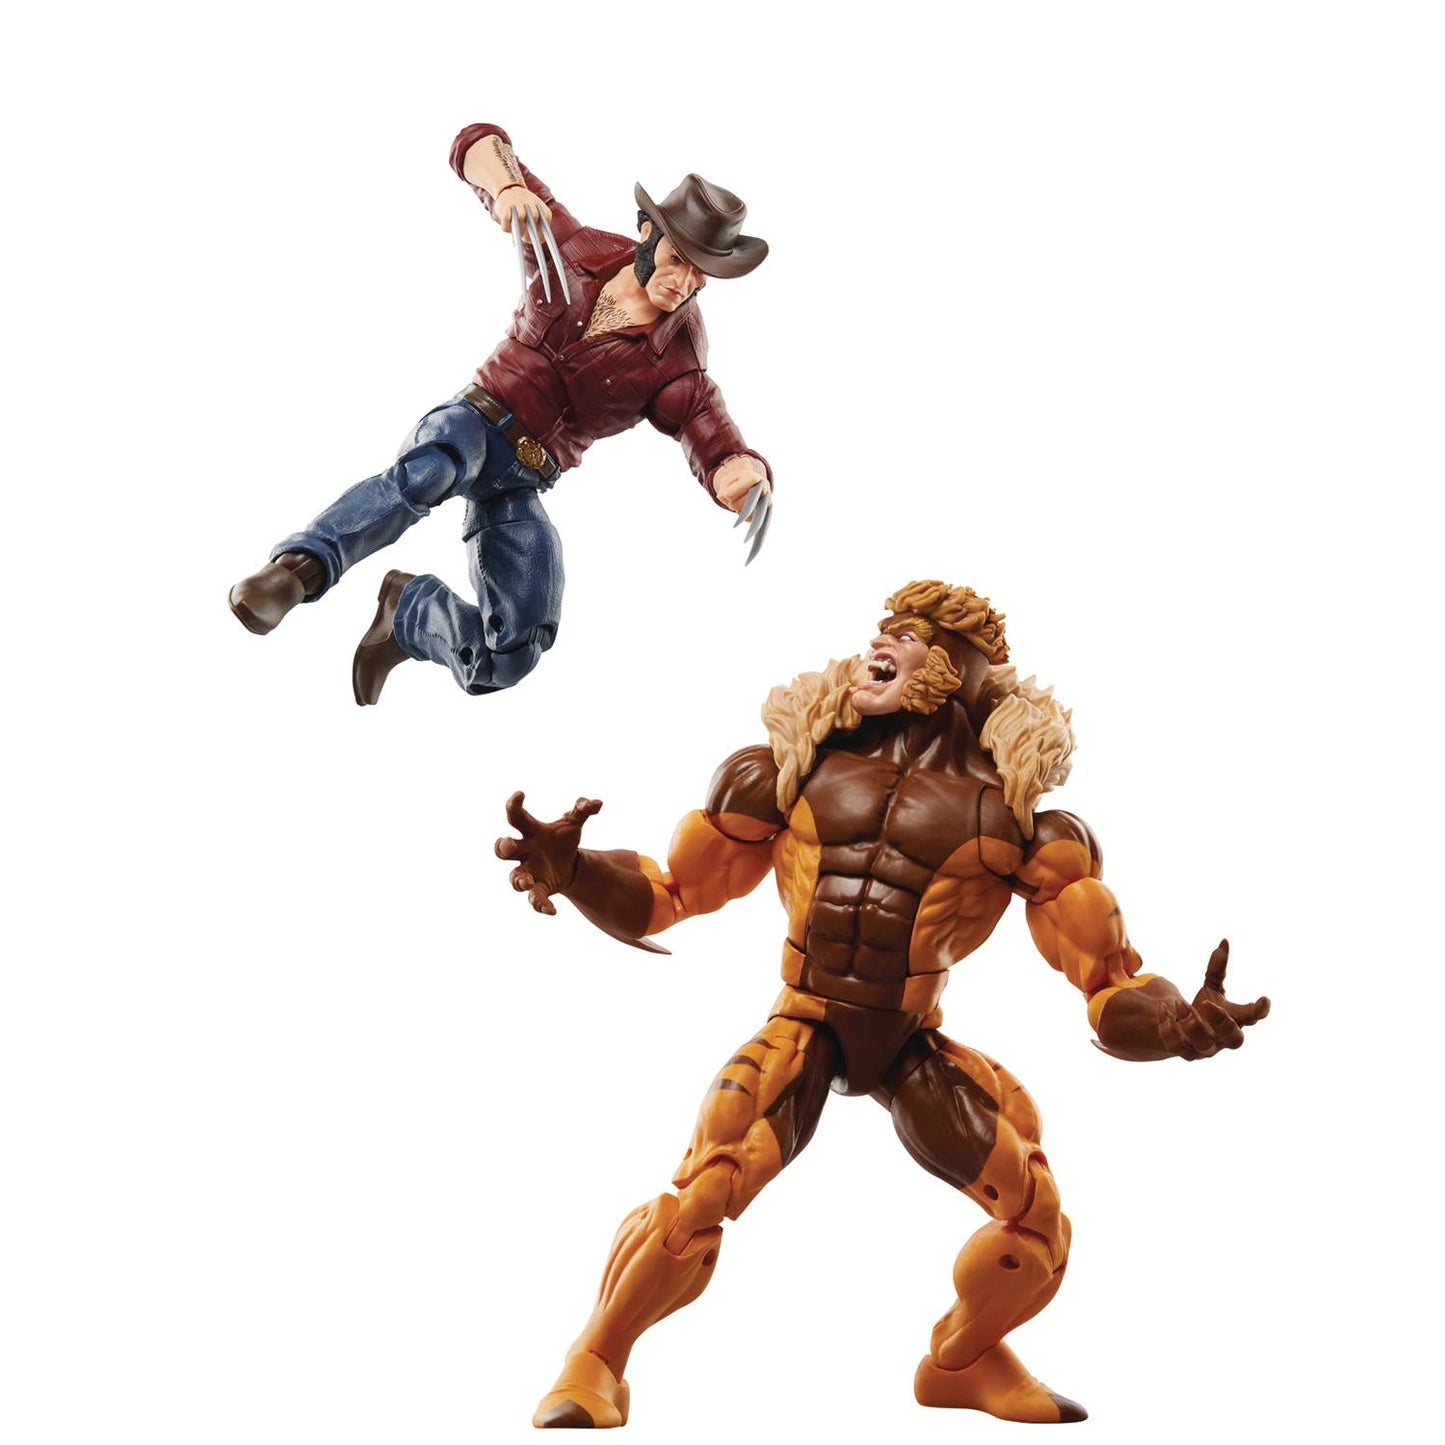 (PRE-ORDER) Marvel Legends - 50th Anniversary Wolverine vs Sabertooth - 6 inch Action Figures 2 Pack